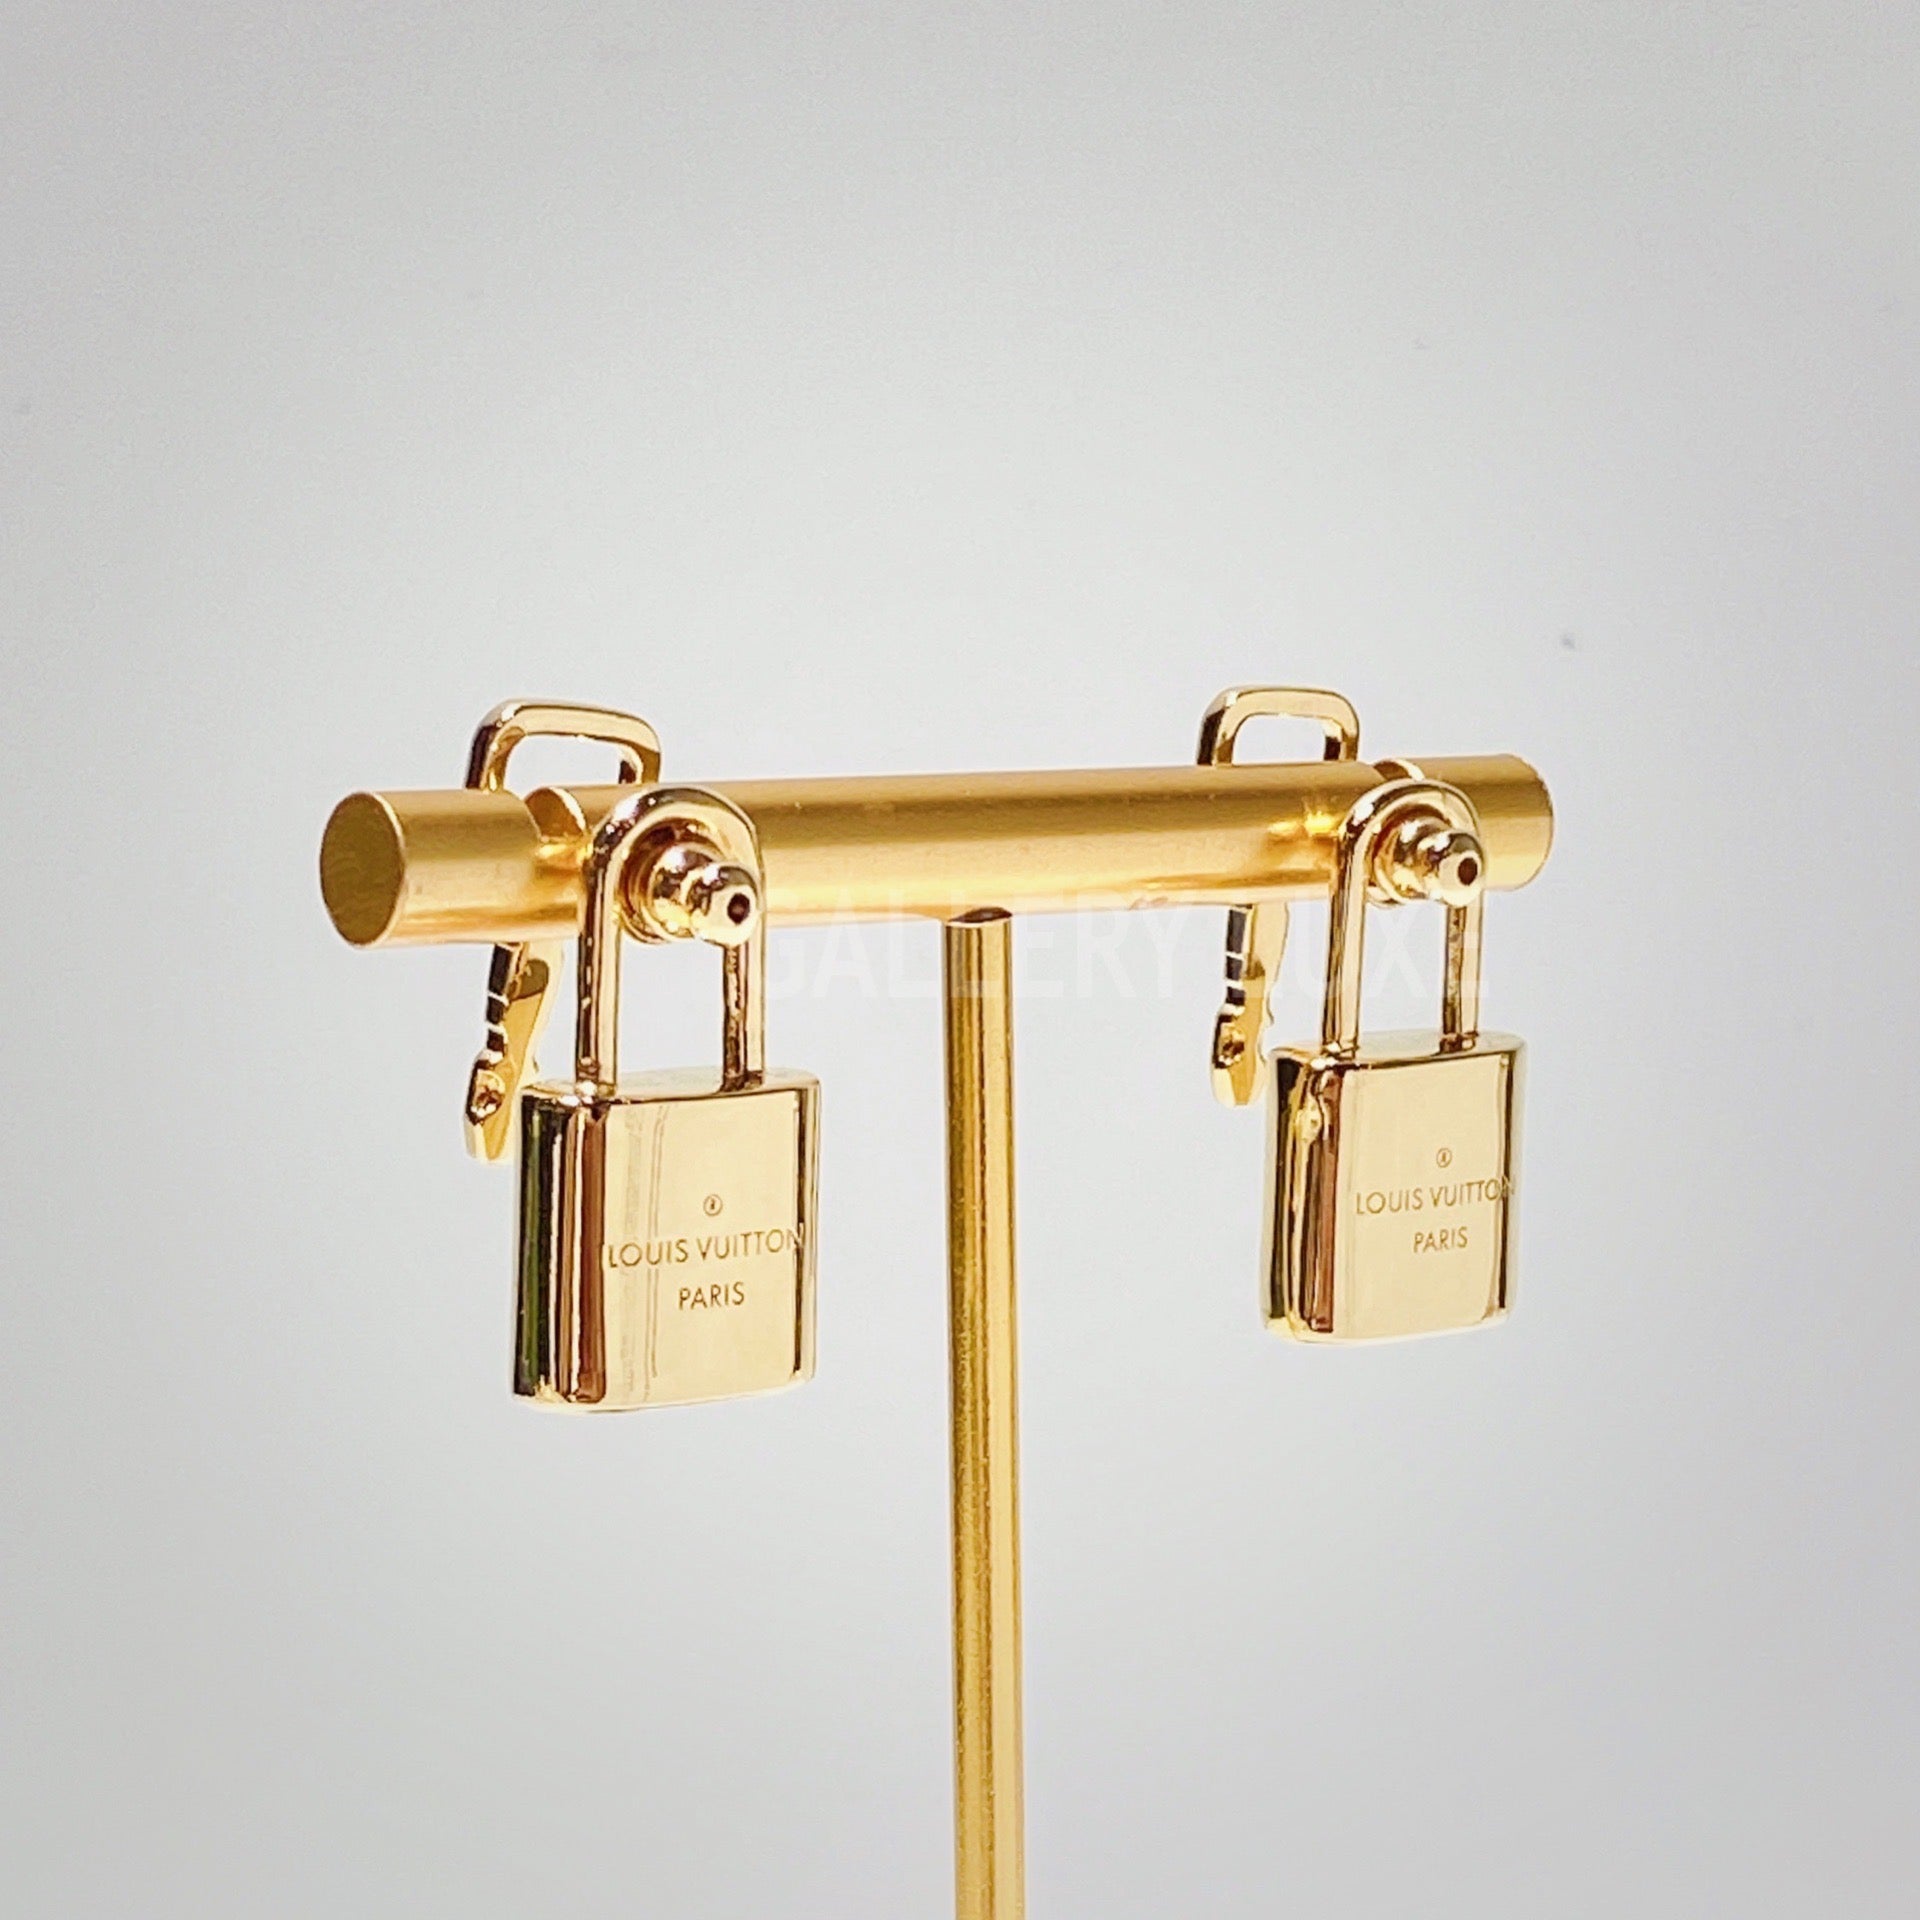 At Auction: LOUIS VUITTON Ohrstecker LV ICONIC, act. NP.: 420,-.